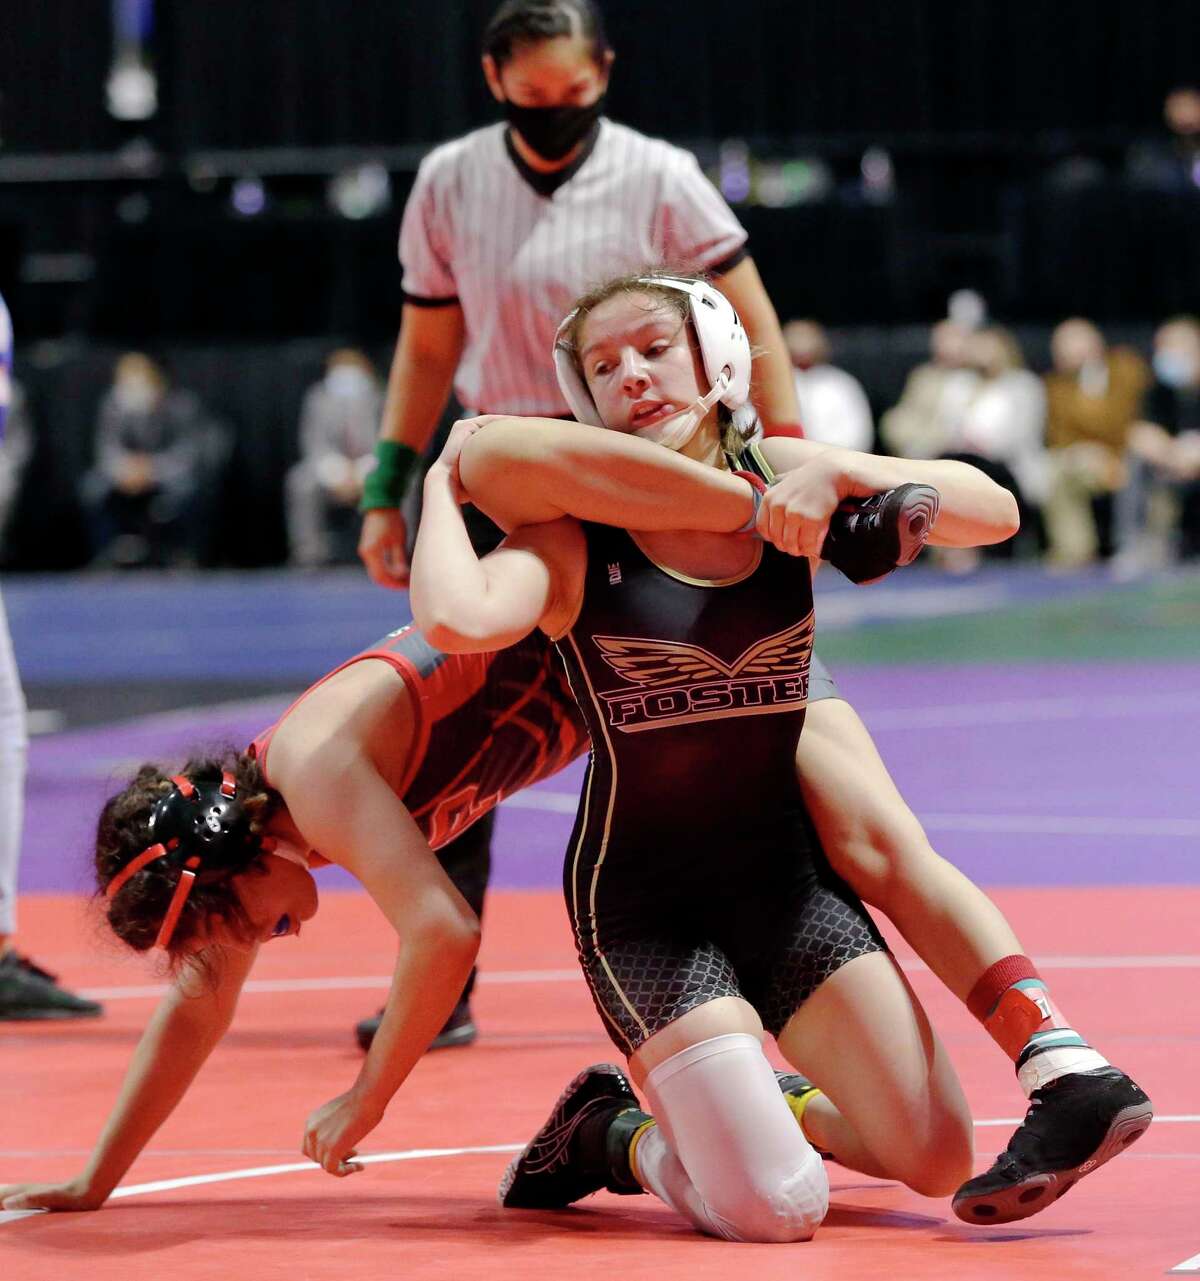 Emily Trevino with Mission Sharyland Pioneer, left, is taken down by Madison Canales with Richmond Foster, right, in the 119 weight class of the UIL Girls 5A State Wrestling Championships Friday, Apr. 23, 2021 at the Berry Center in Cypress, TX.